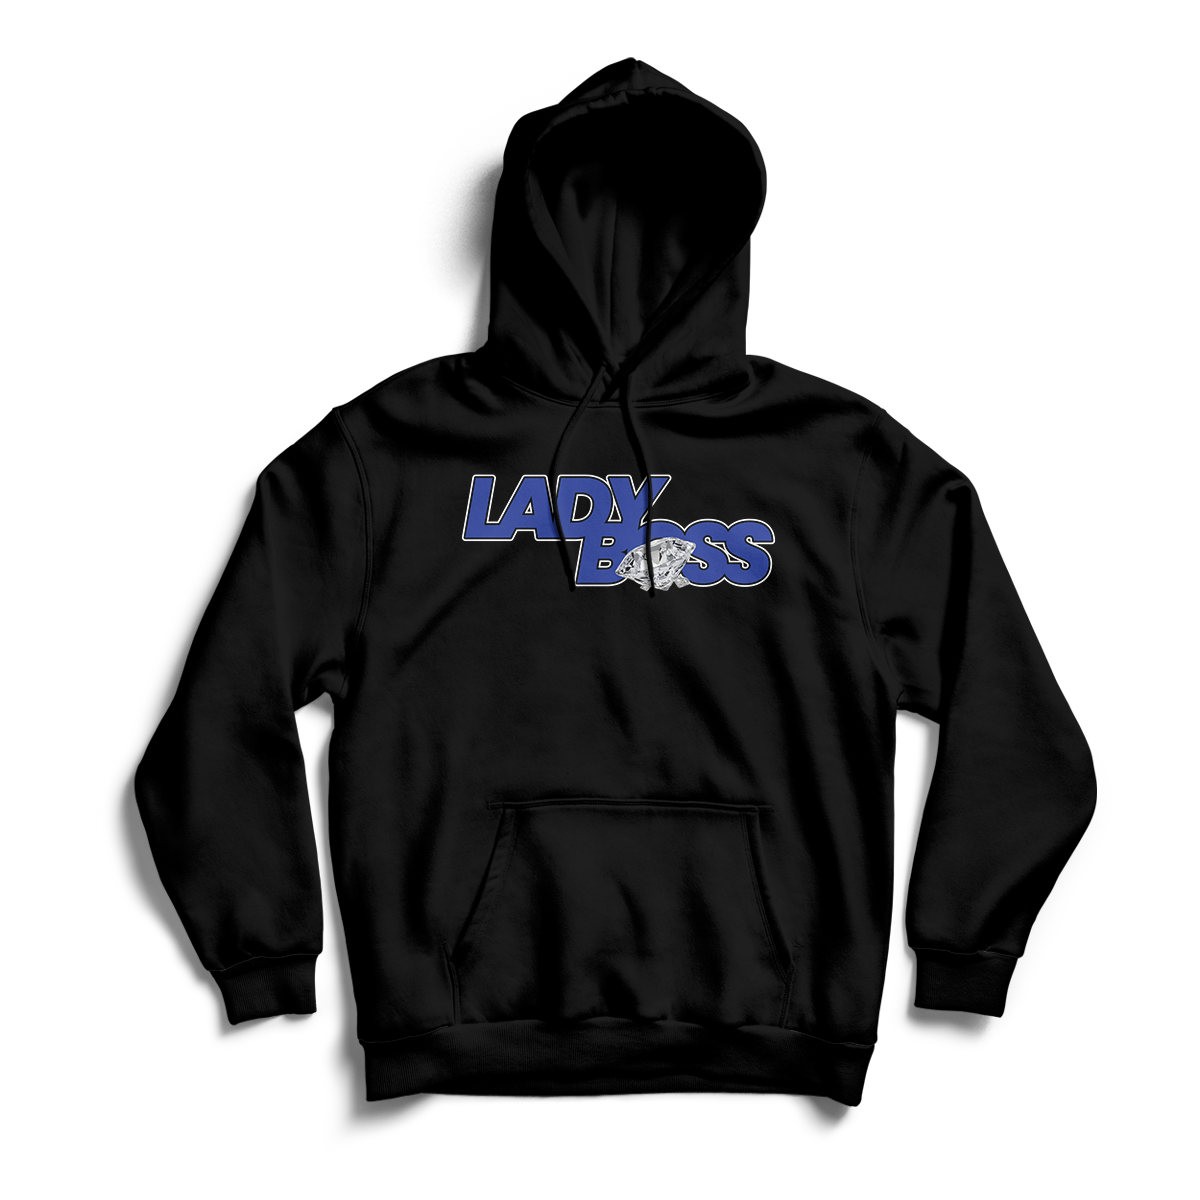 'Lady Boss' in Hyper Royal CW Unisex Pullover Hoodie